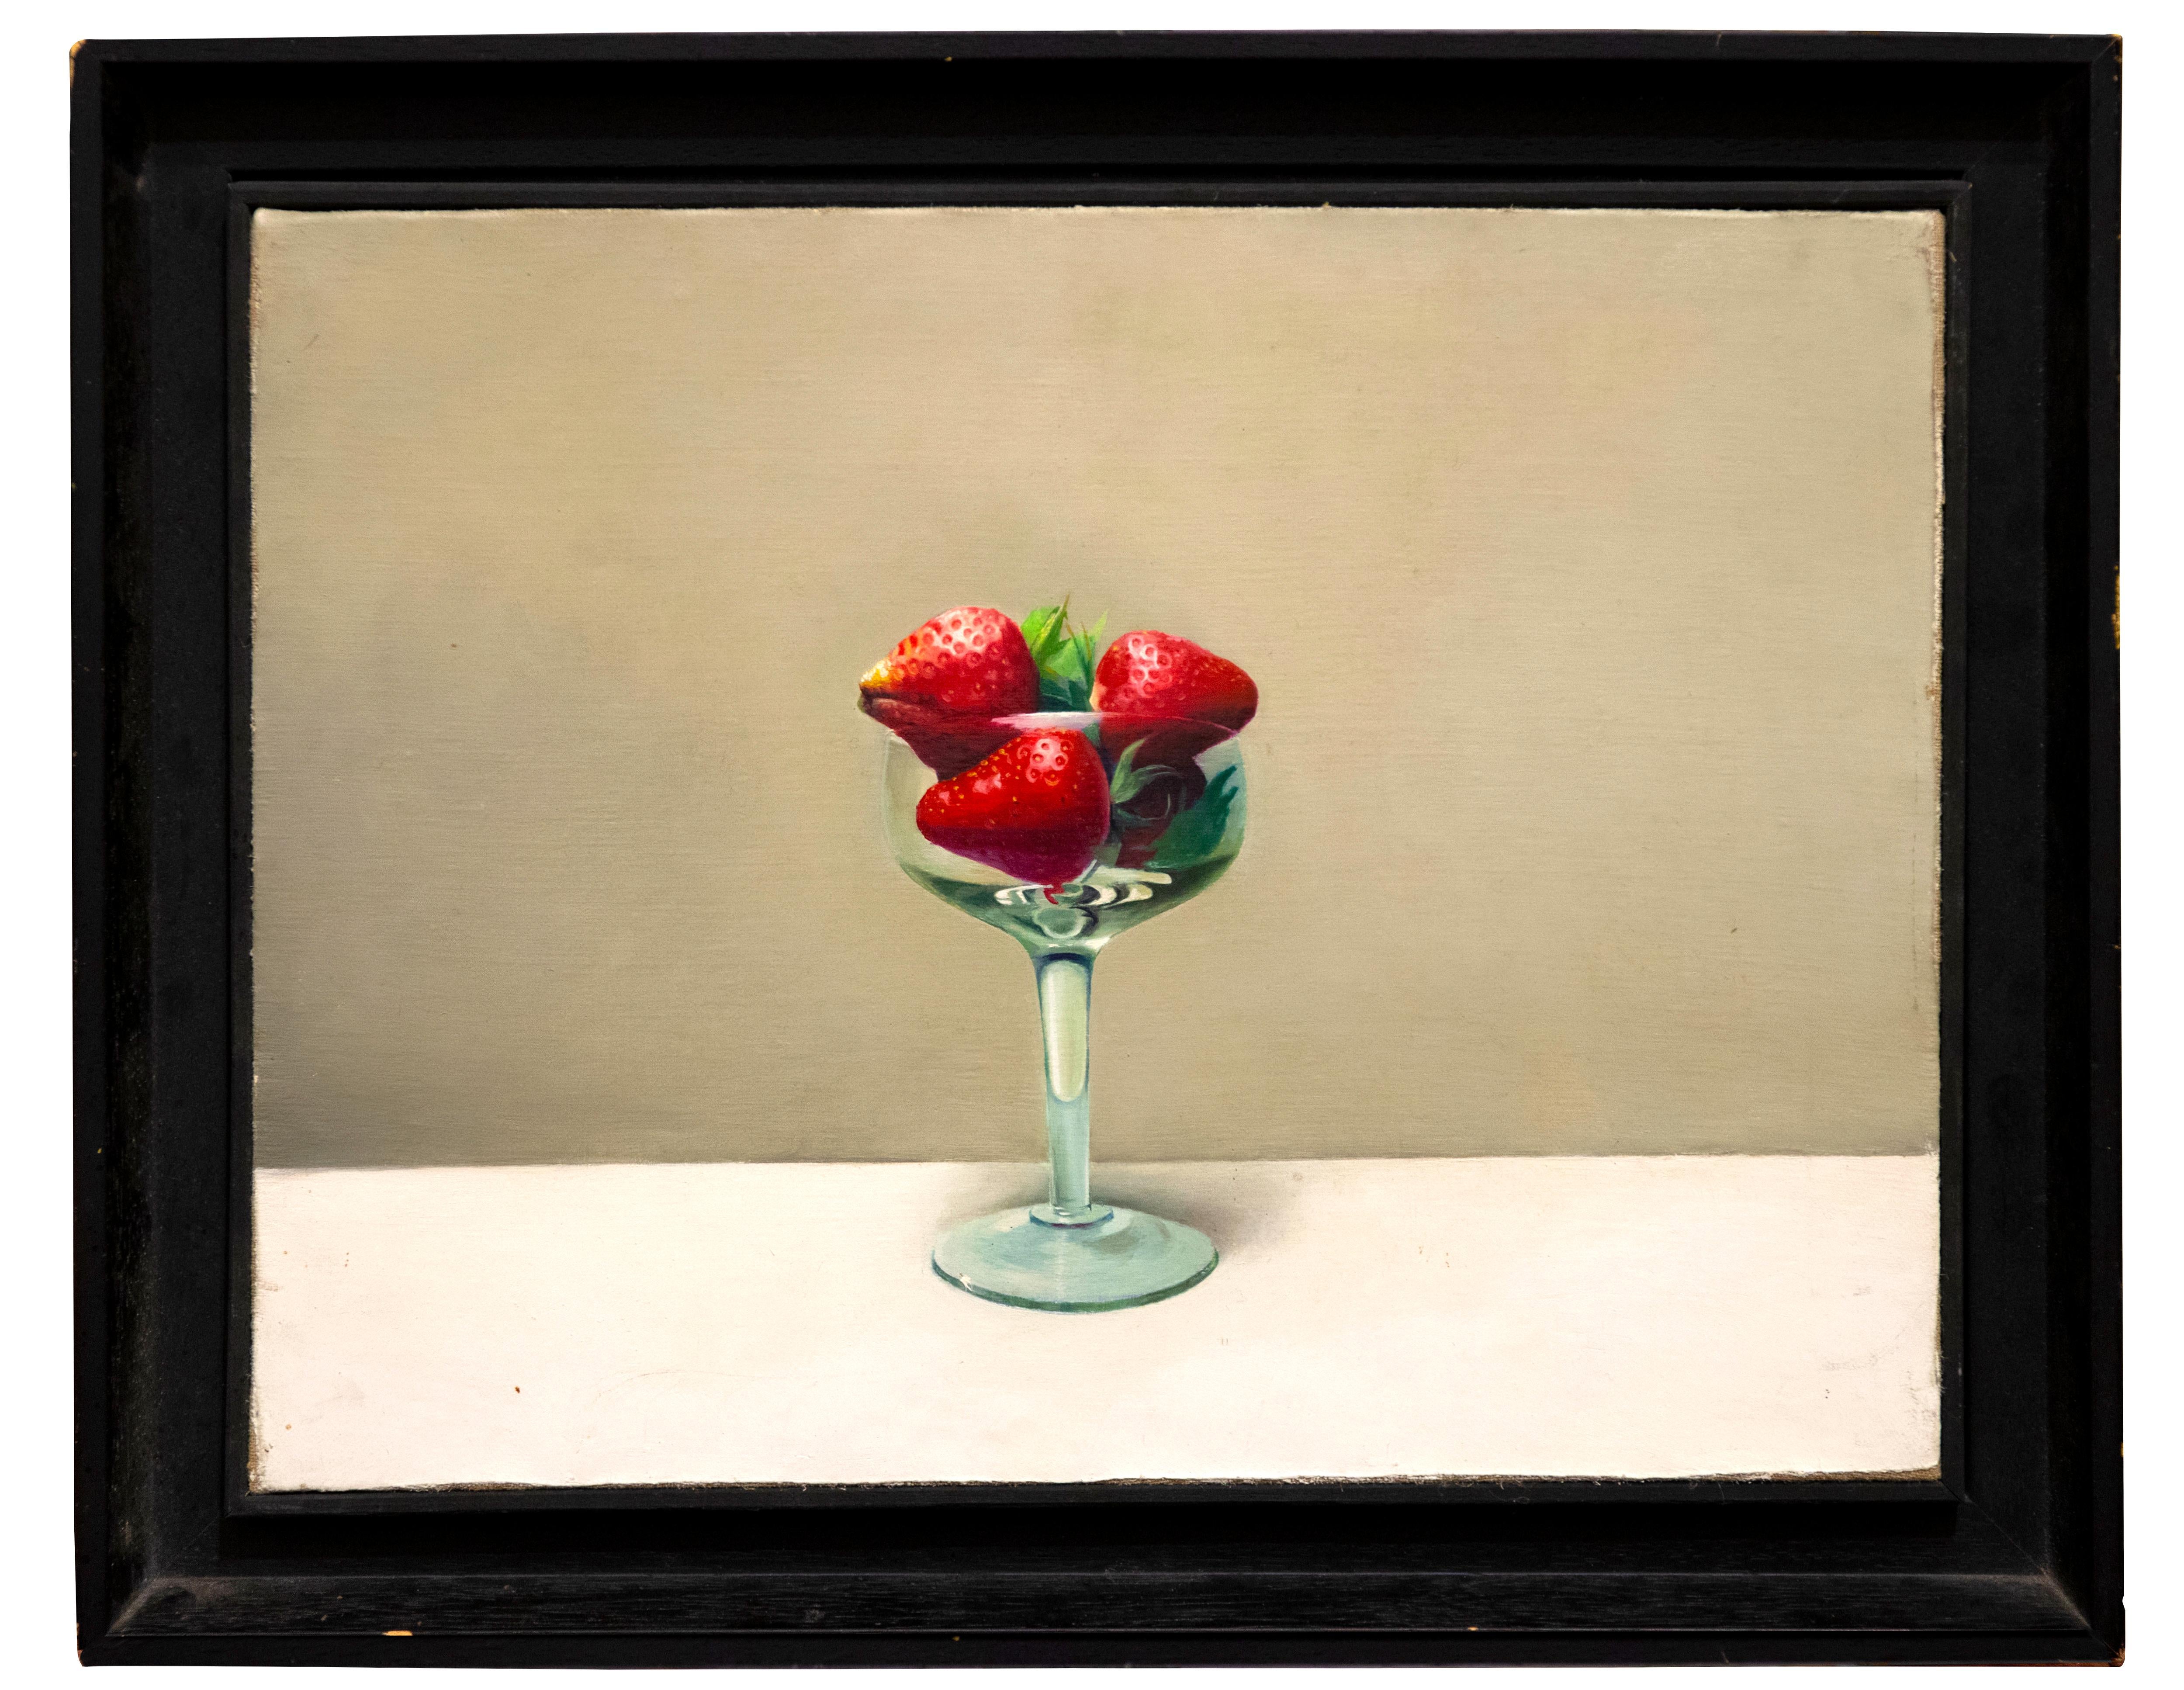  Cup with Strawberries - Oil on Canvas by Zhang Wei Guang (Mirror) - 2000